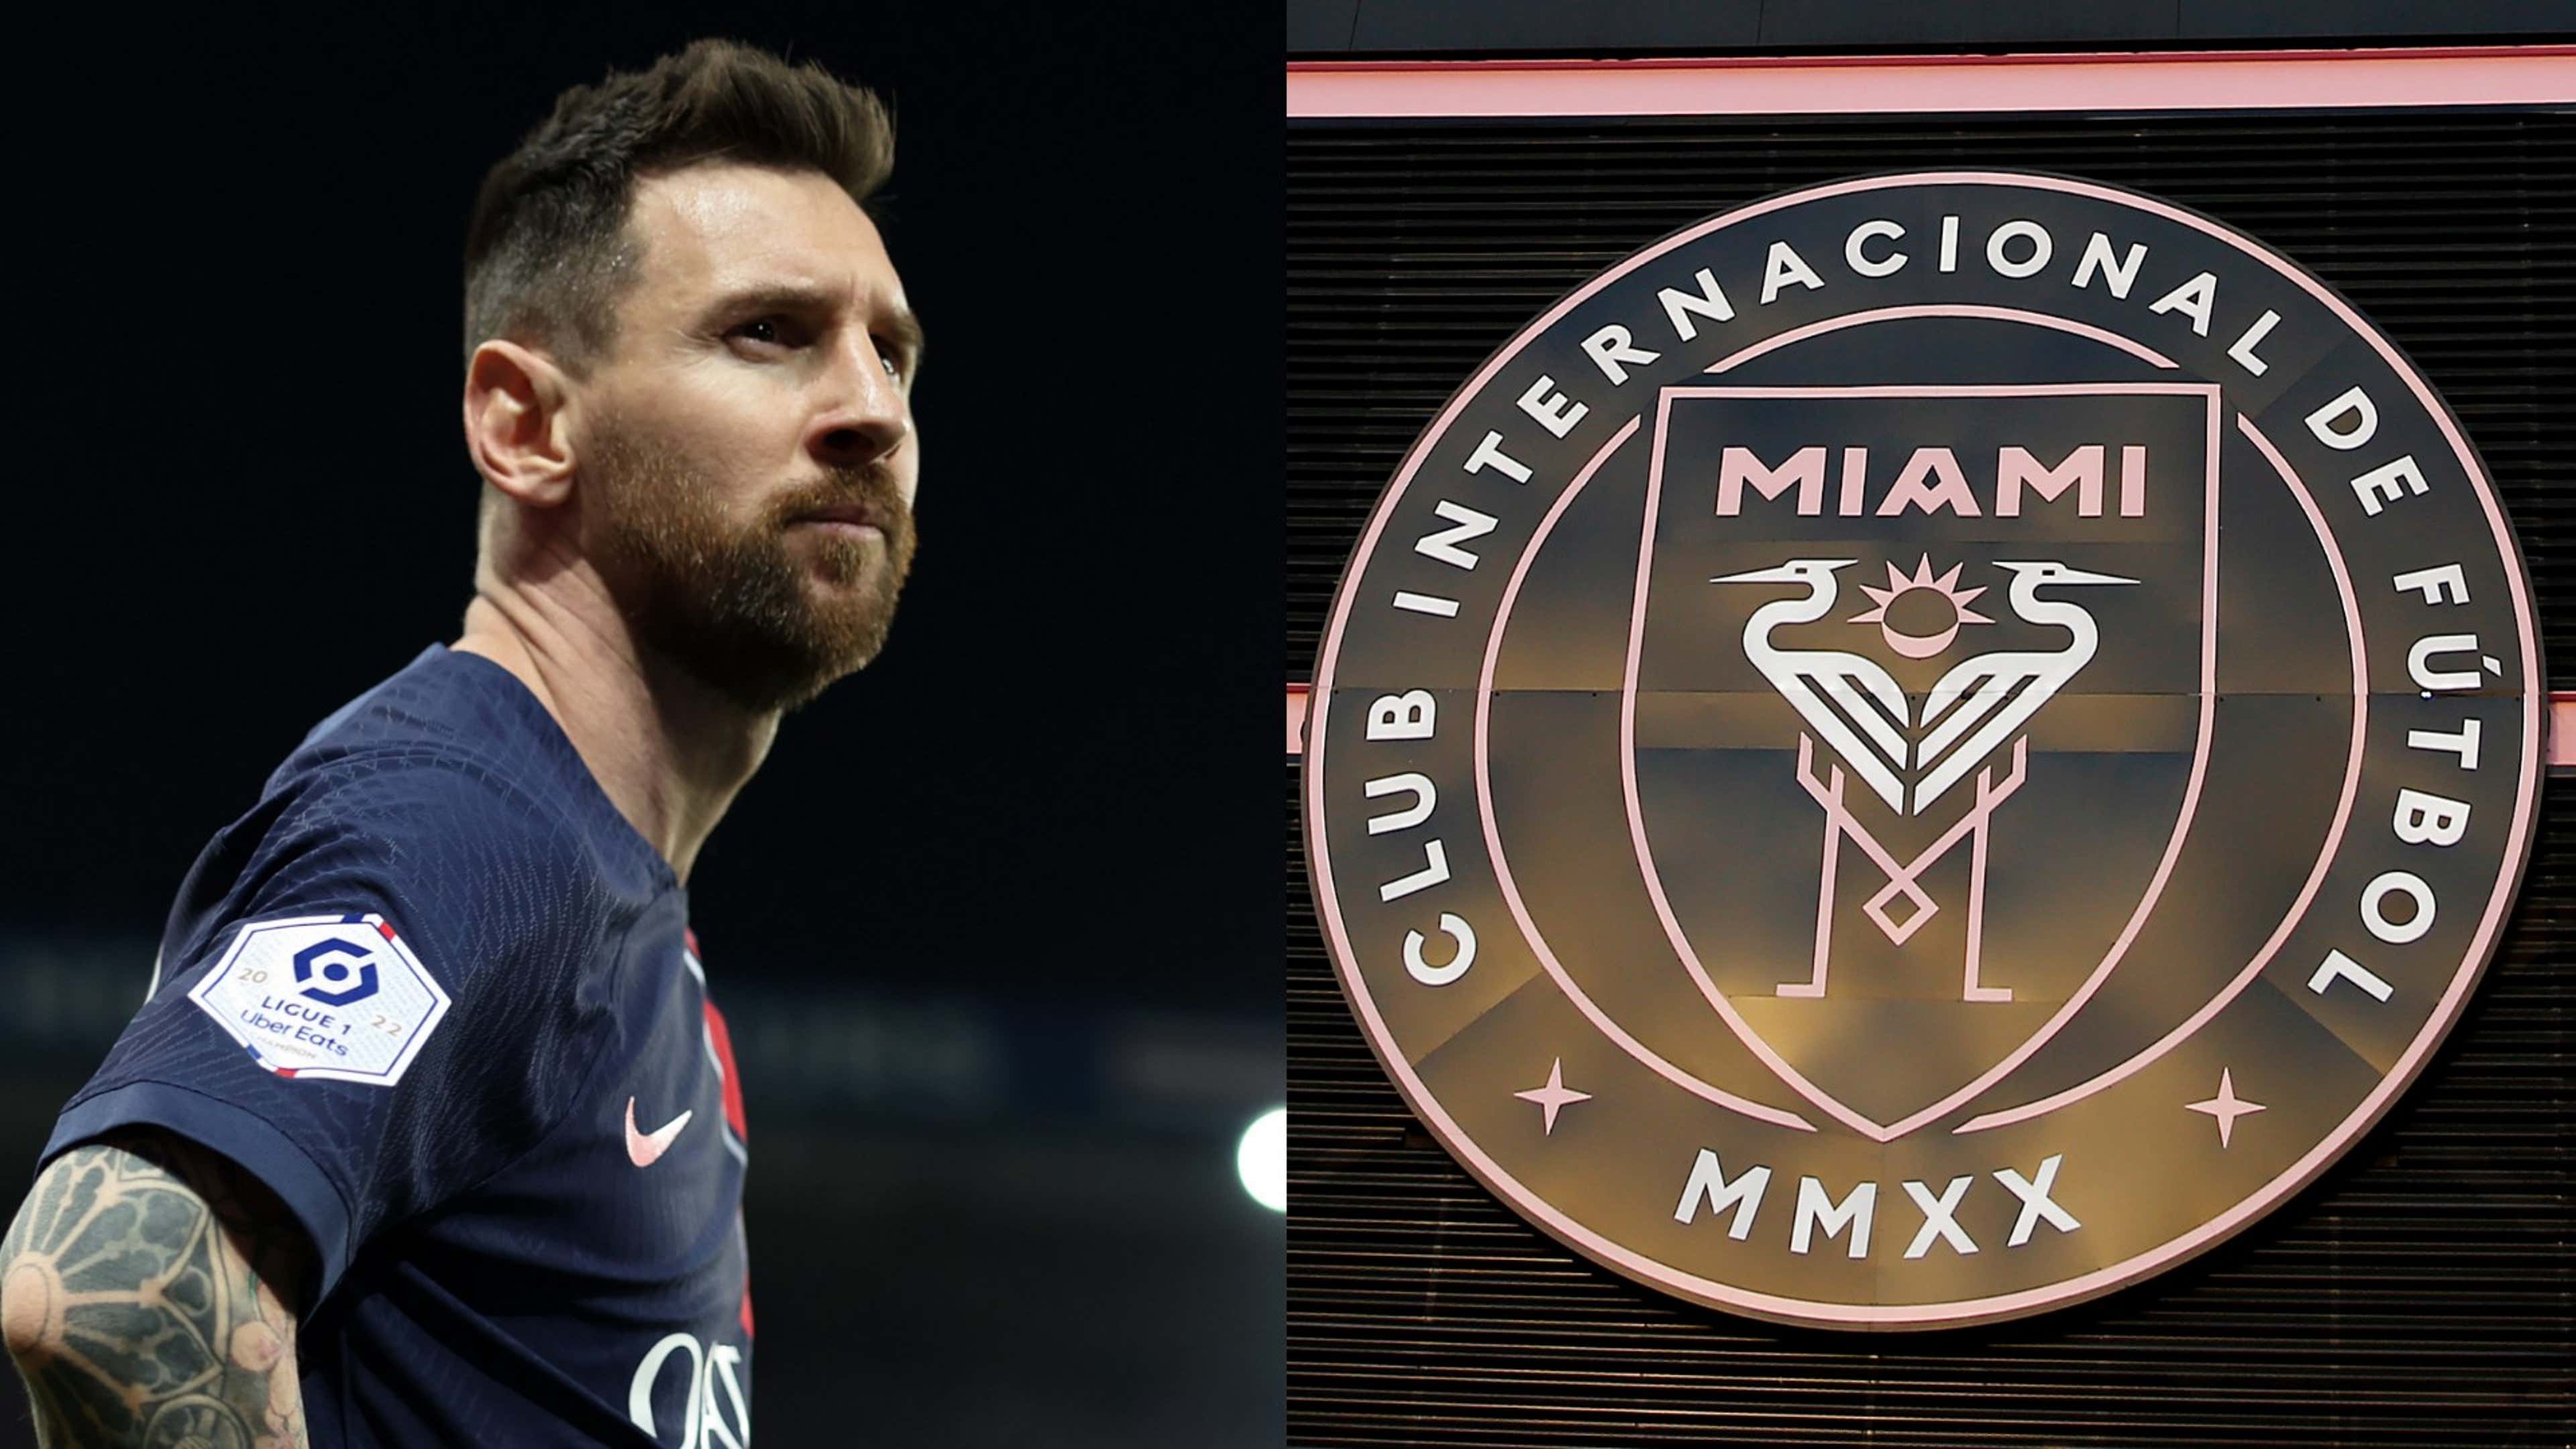 Lionel Messi to join Inter Miami. How have other stars done in MLS?